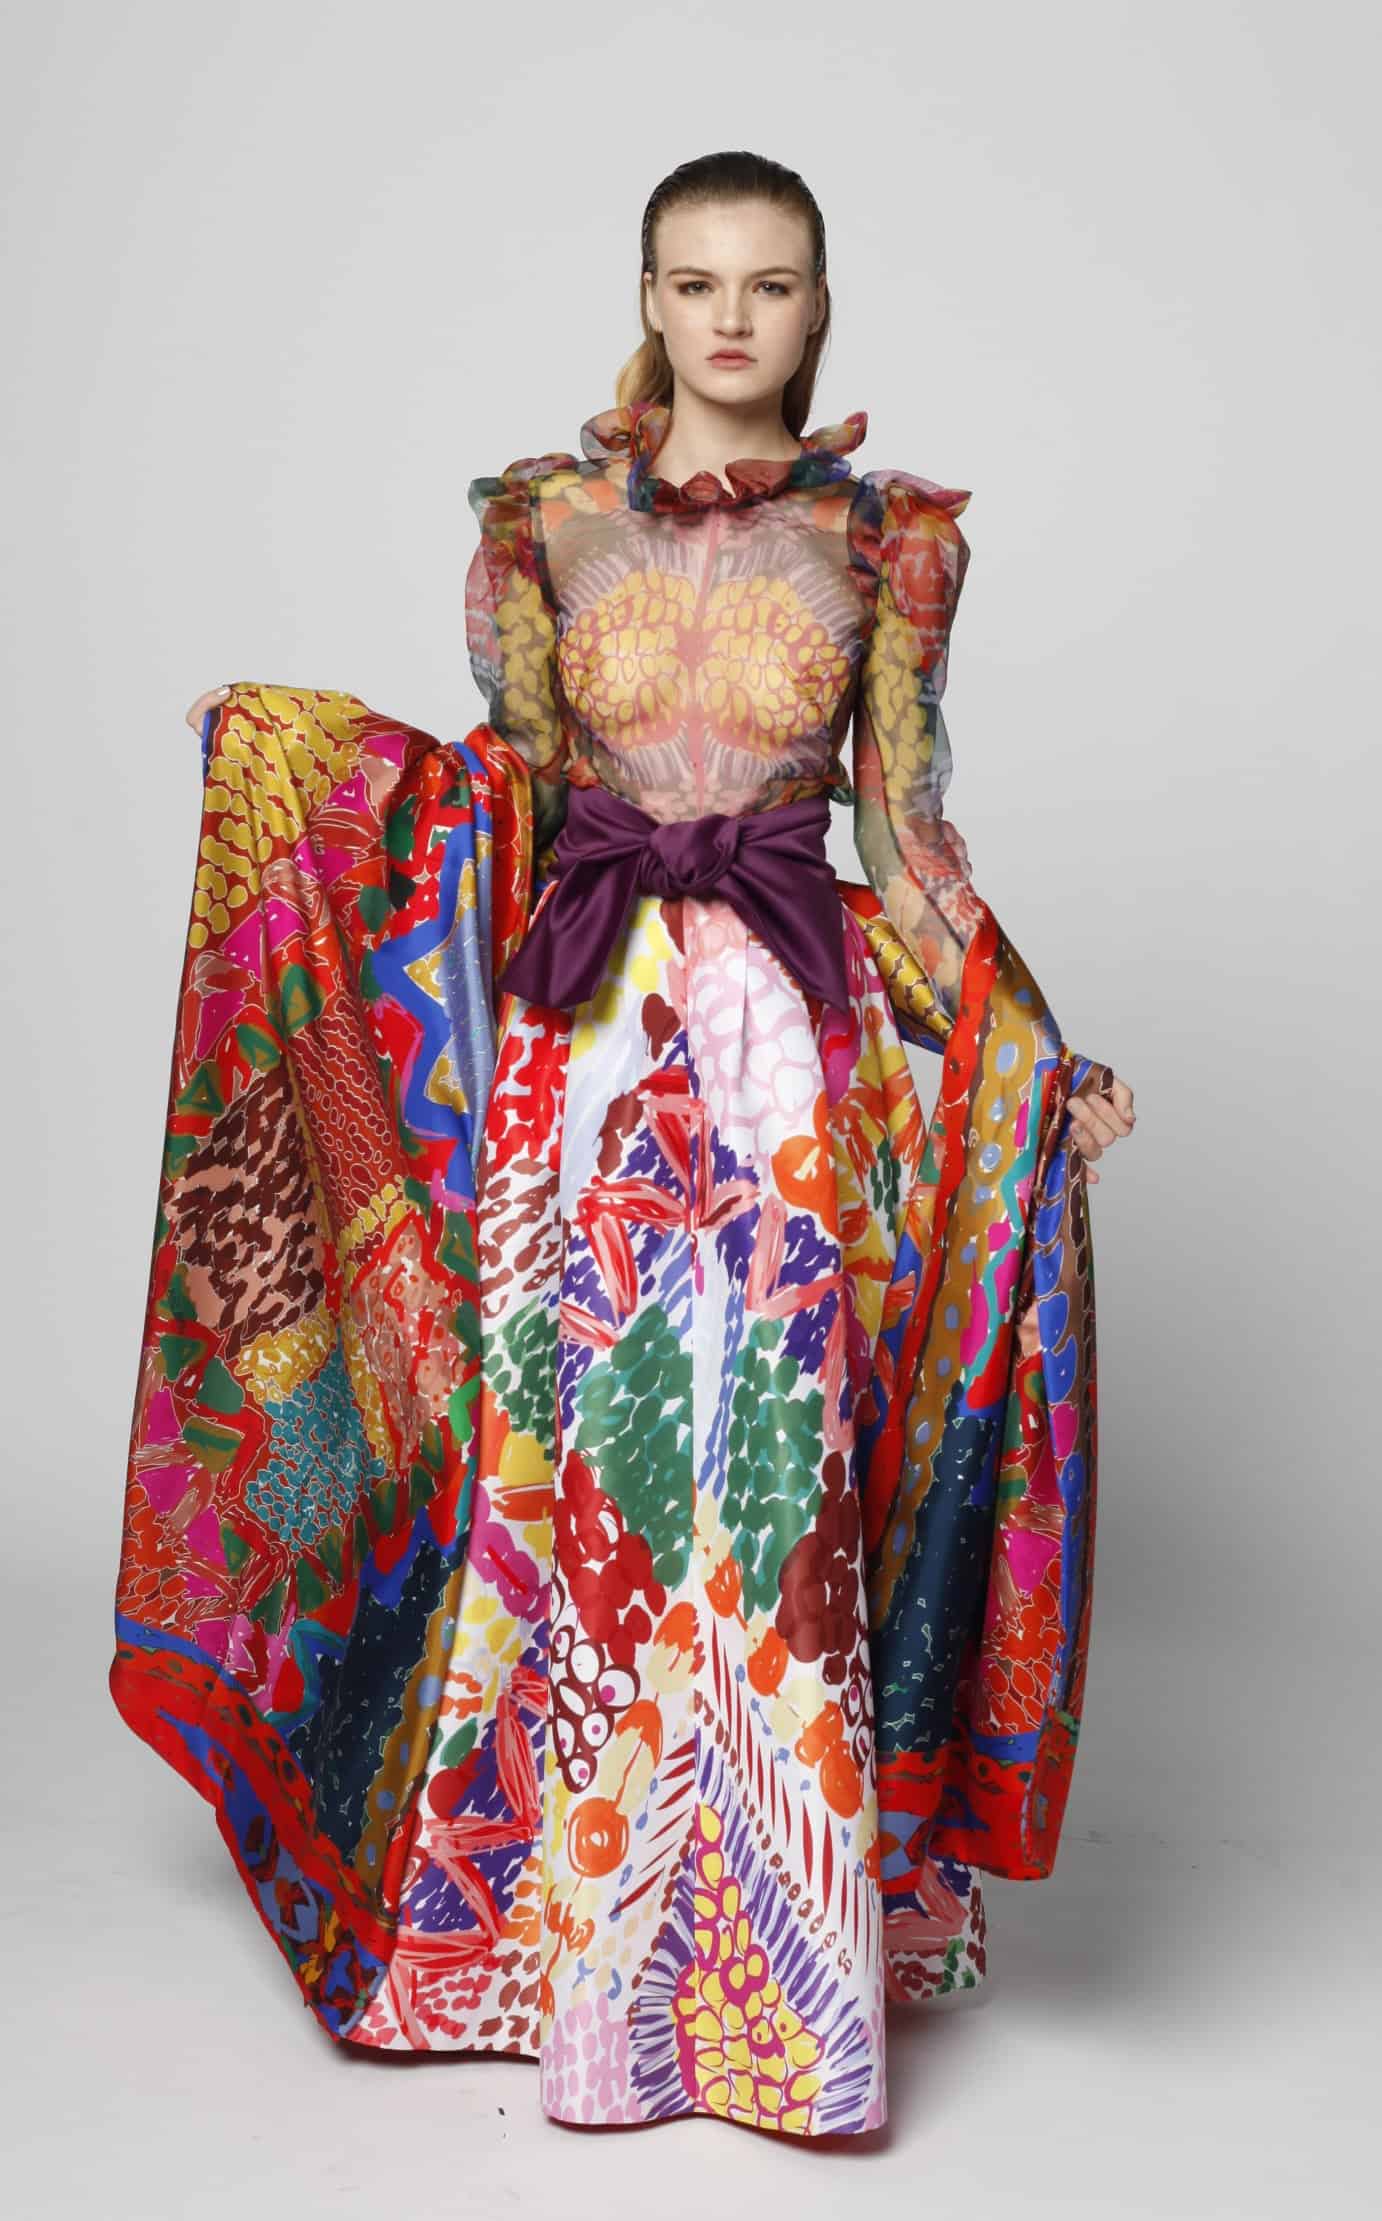 These wild inkjet-printed outfits make tie-dyes look tame